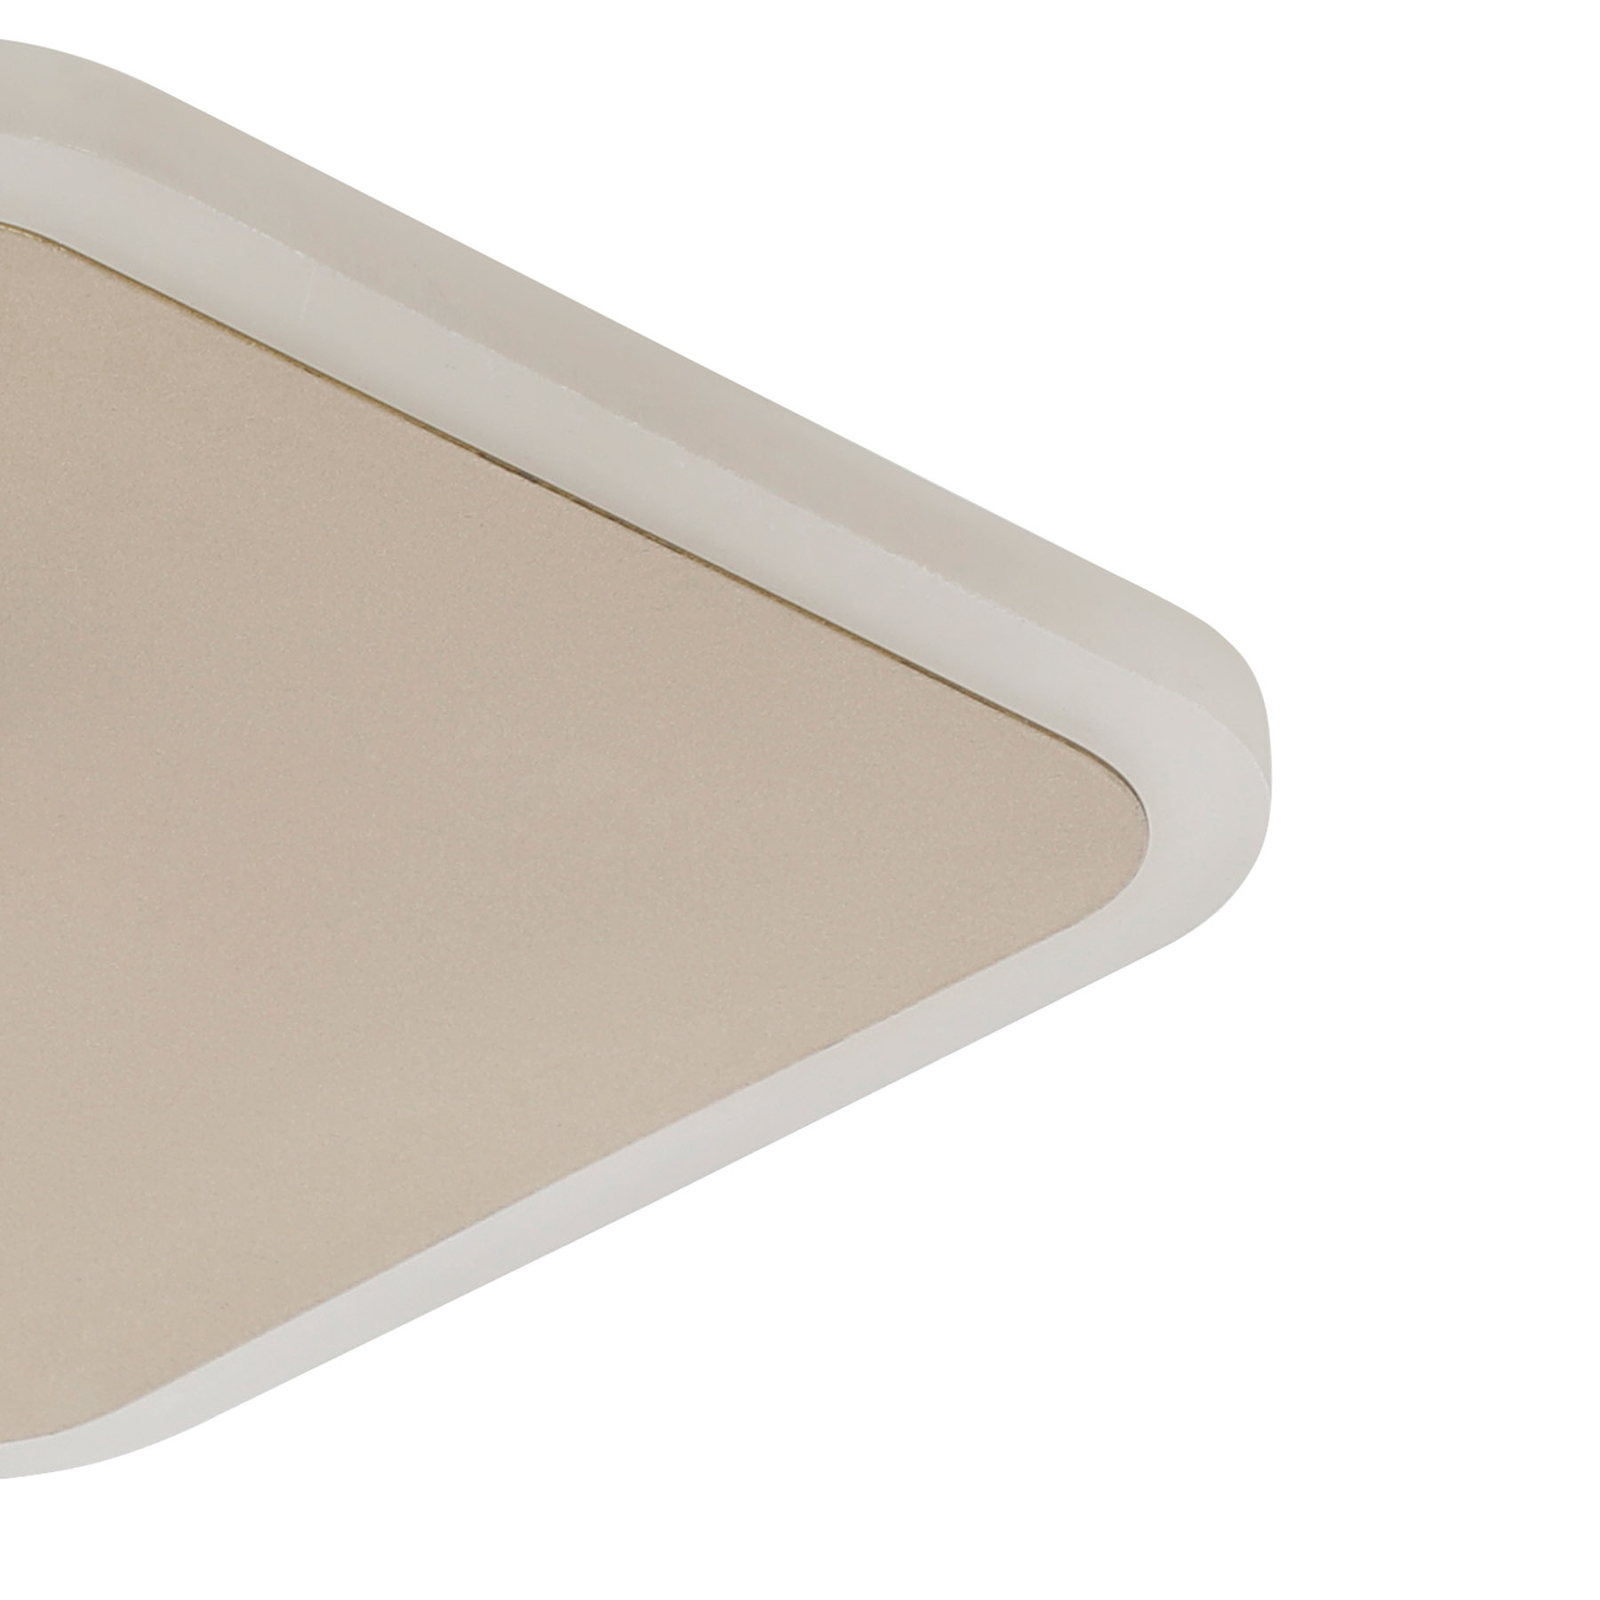 LED ceiling light Gafares with remote control angular gold